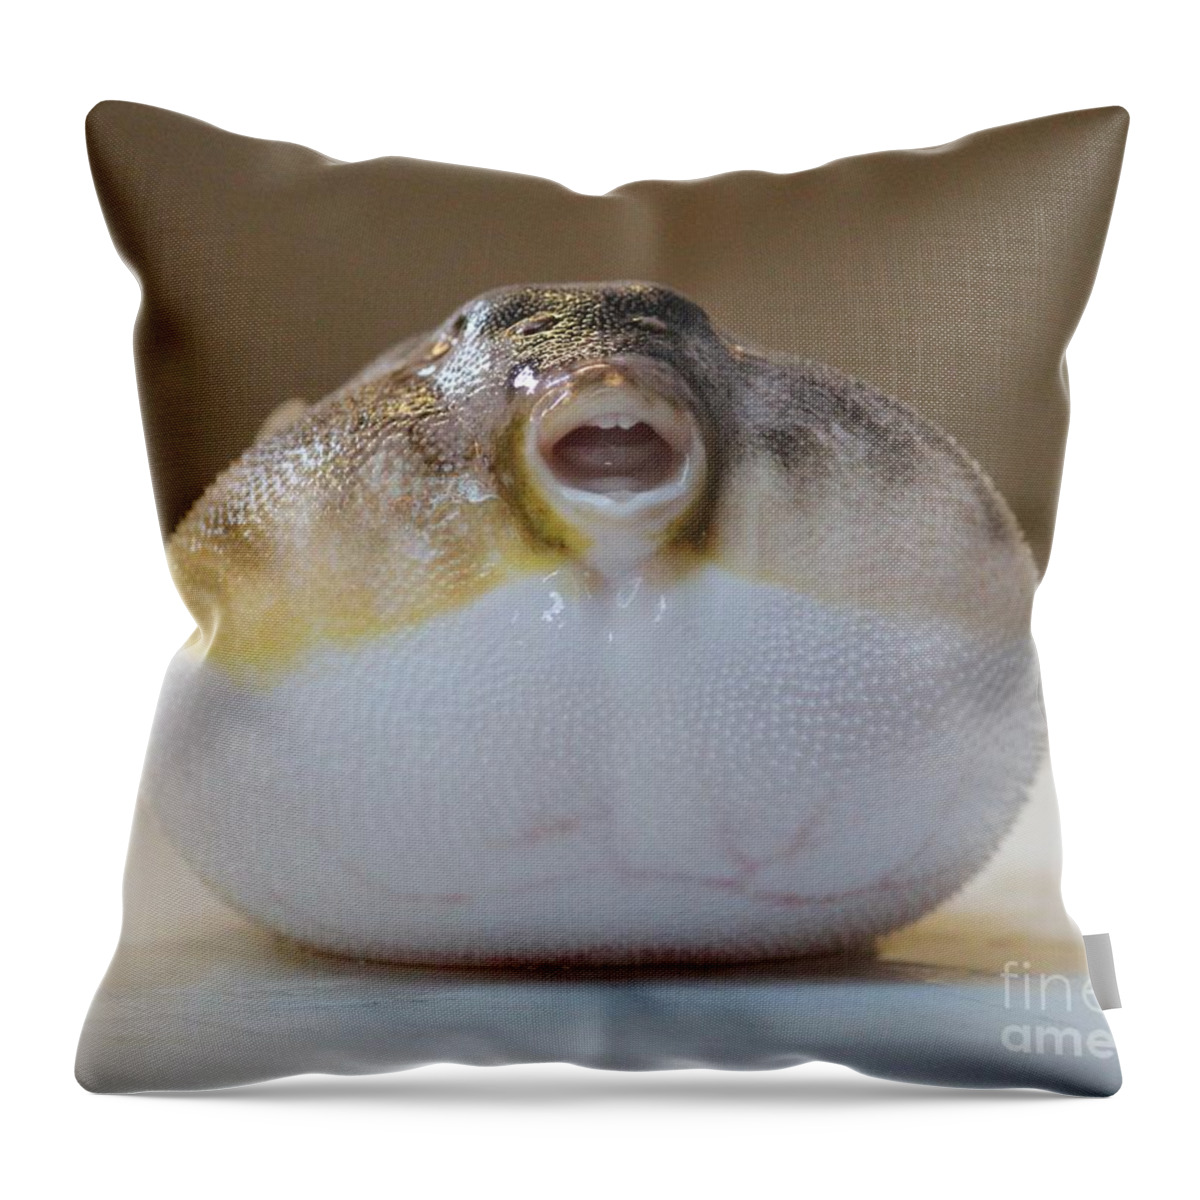 Blowfish Throw Pillow featuring the photograph Blowfish by Cynthia Snyder